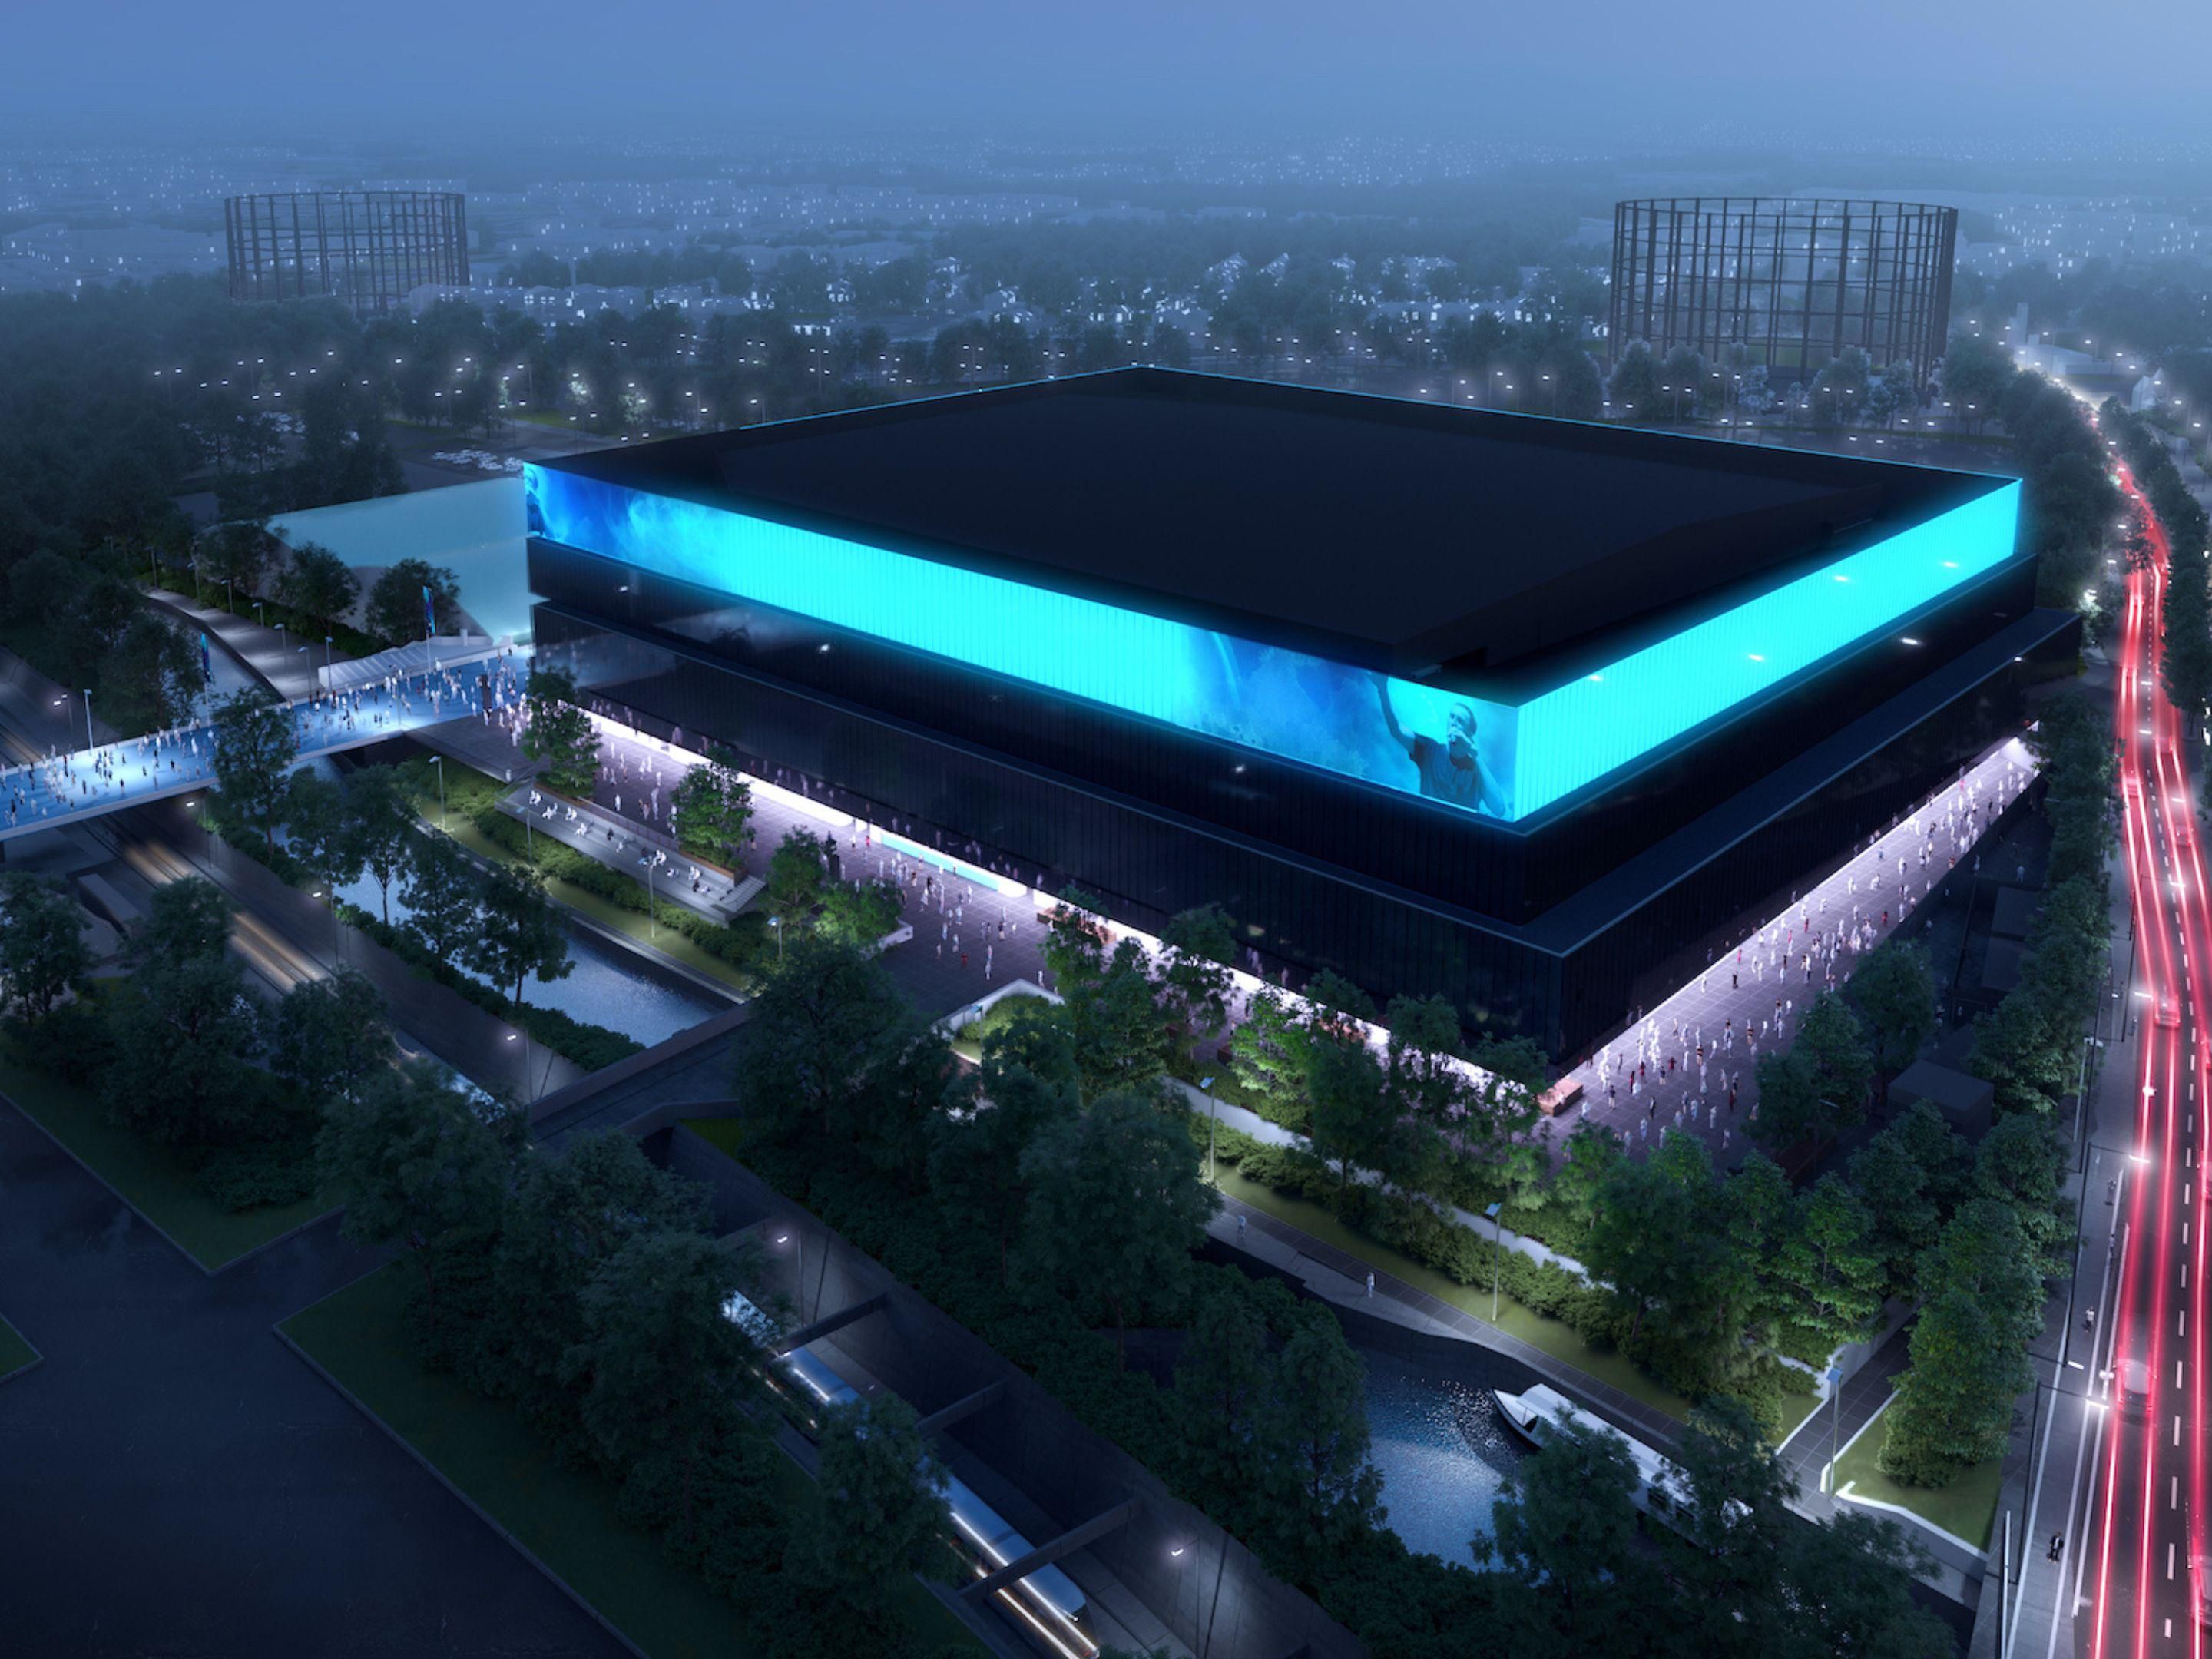 Due to open in 2023, the arena will be the largest of its kind in the UK. Offering the very best experience in live music, the world class venue will be opening its doors just 1.2 miles from the Holiday Inn Manchester - Central Park. For further information please enquire via the 'Learn More' link.